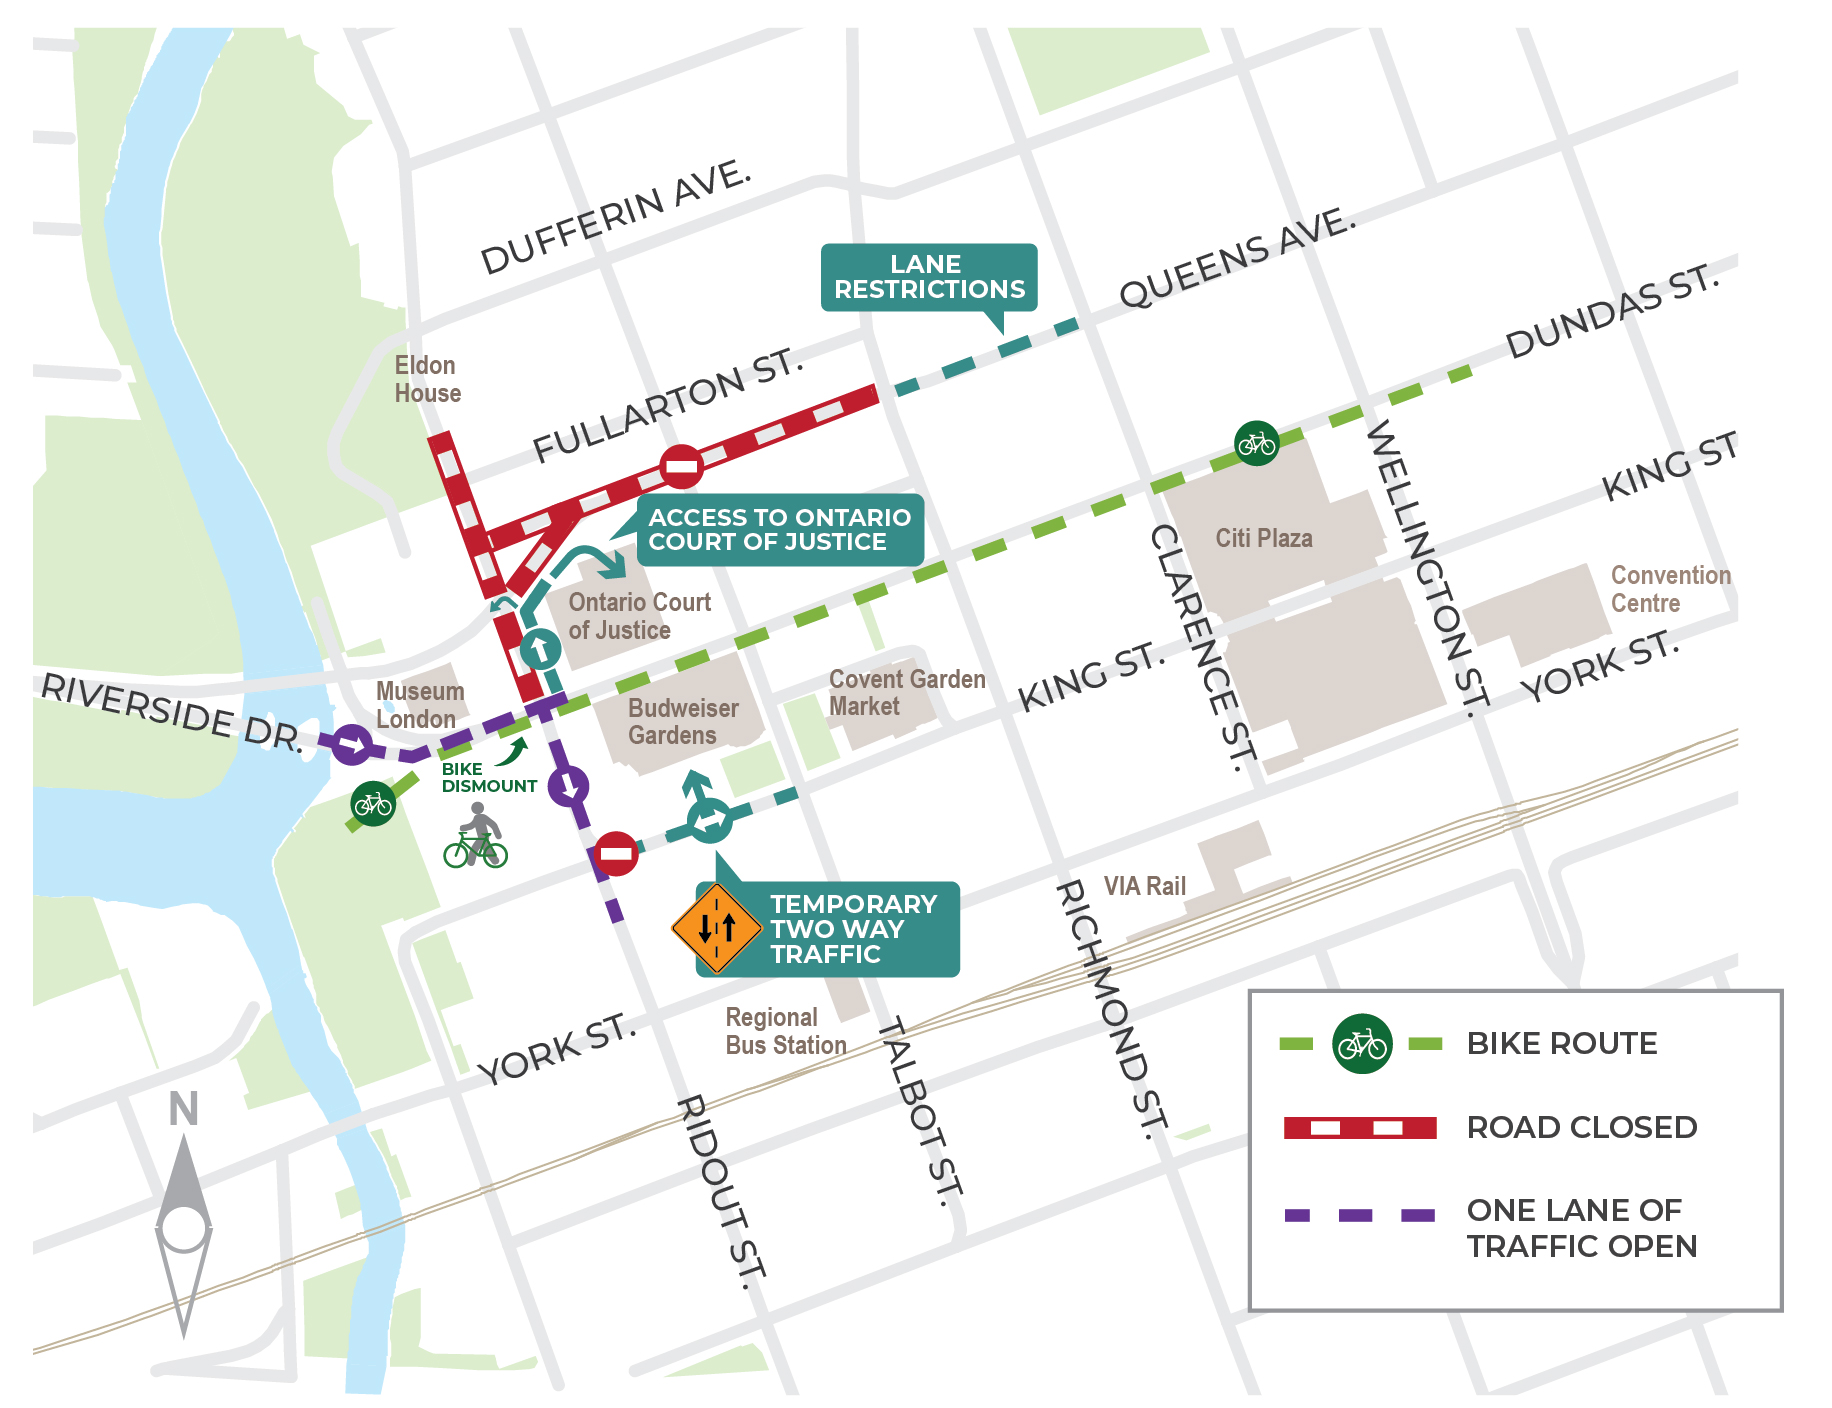 This map shows the upcoming traffic changes downtown